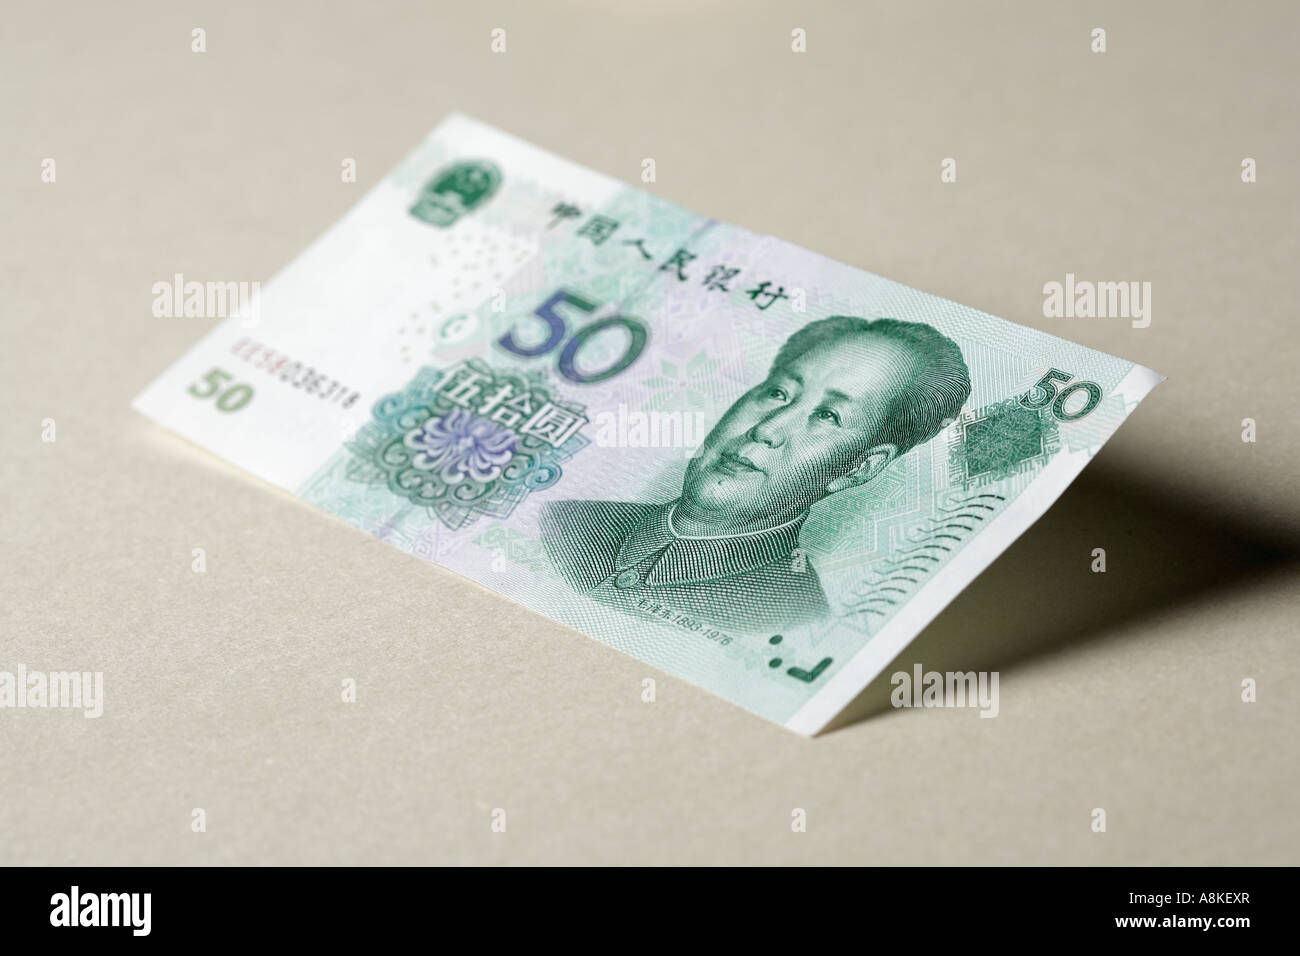 50 Yuan bank note chinese currency paper money Stock Photo